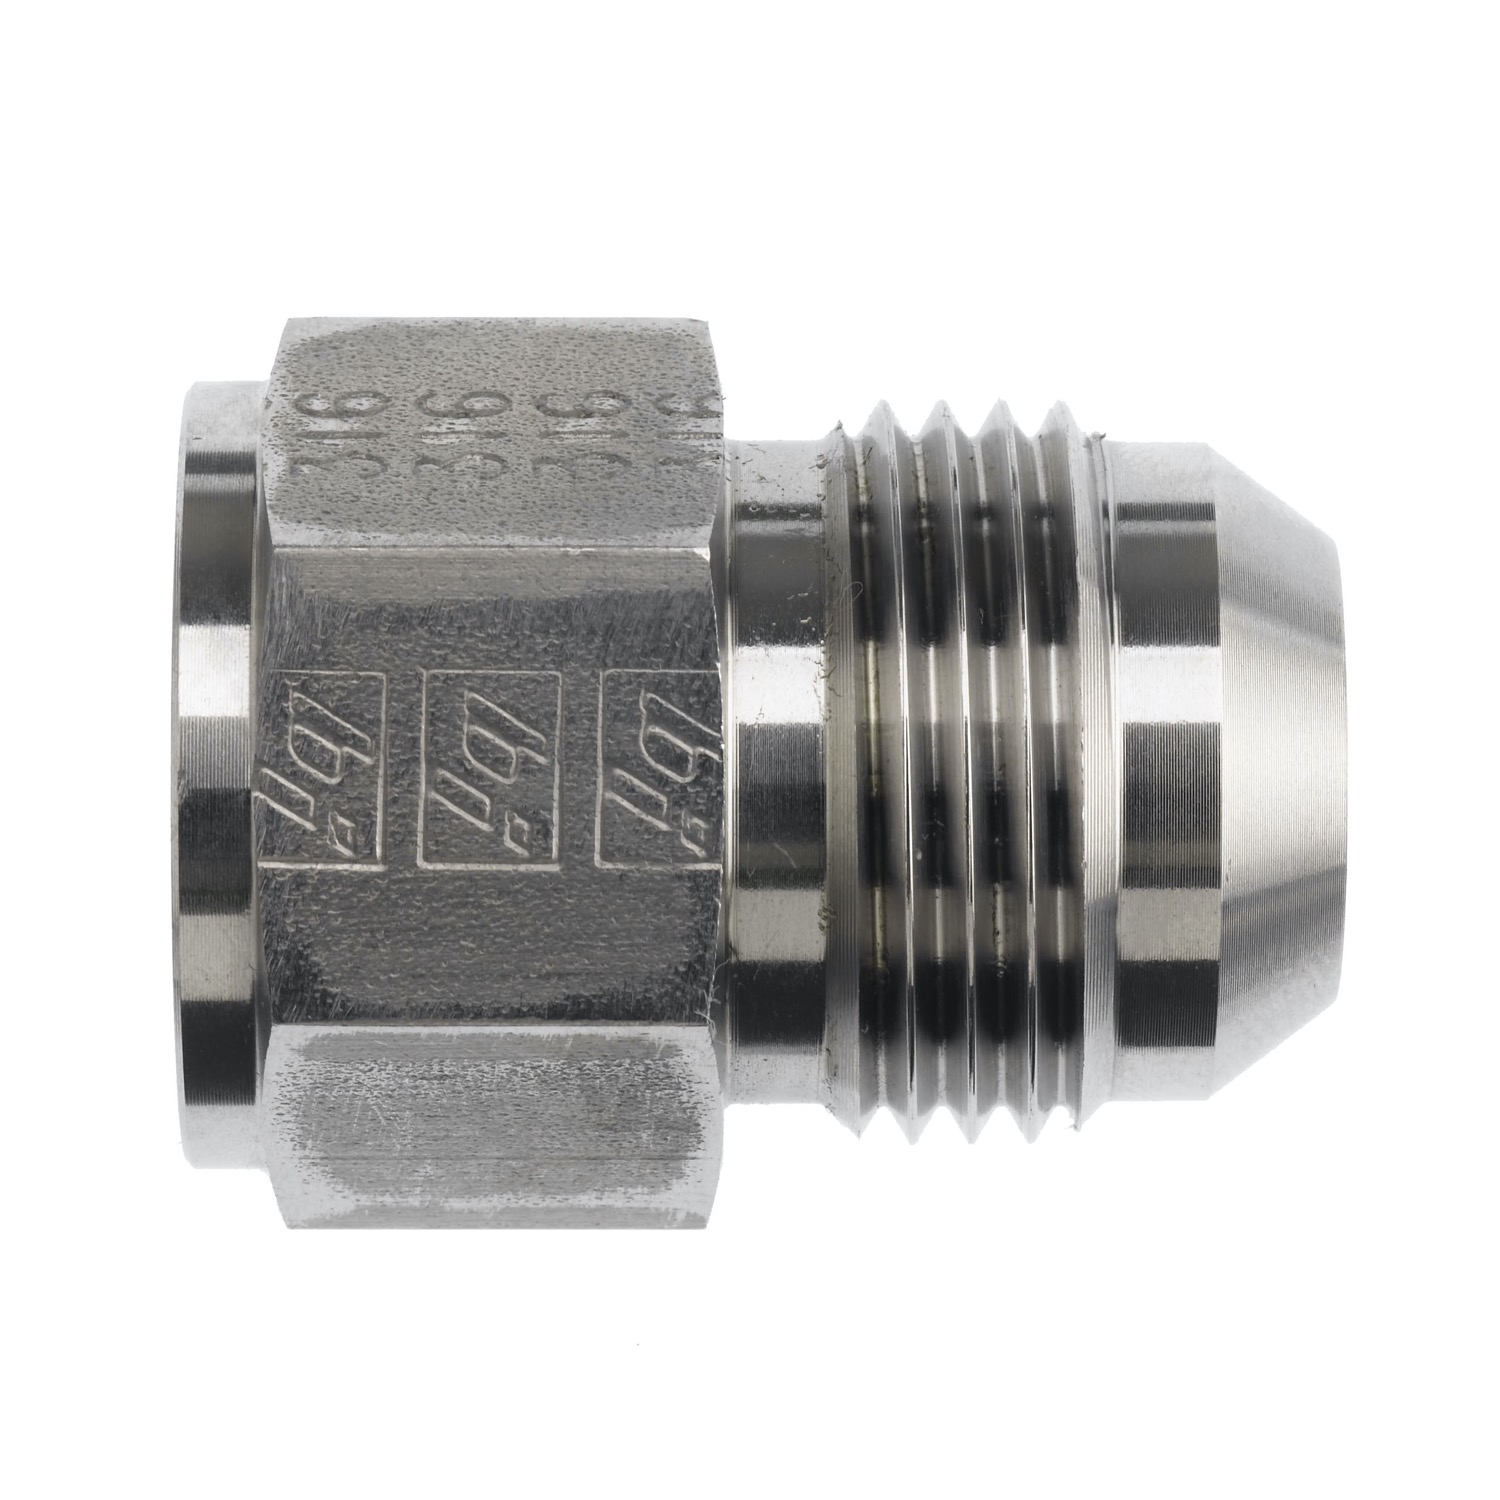 Hydraulic Hose Adapters - Straight Reducer Fitting, JIC 37° Flare, 2406 Series 2406-24-20